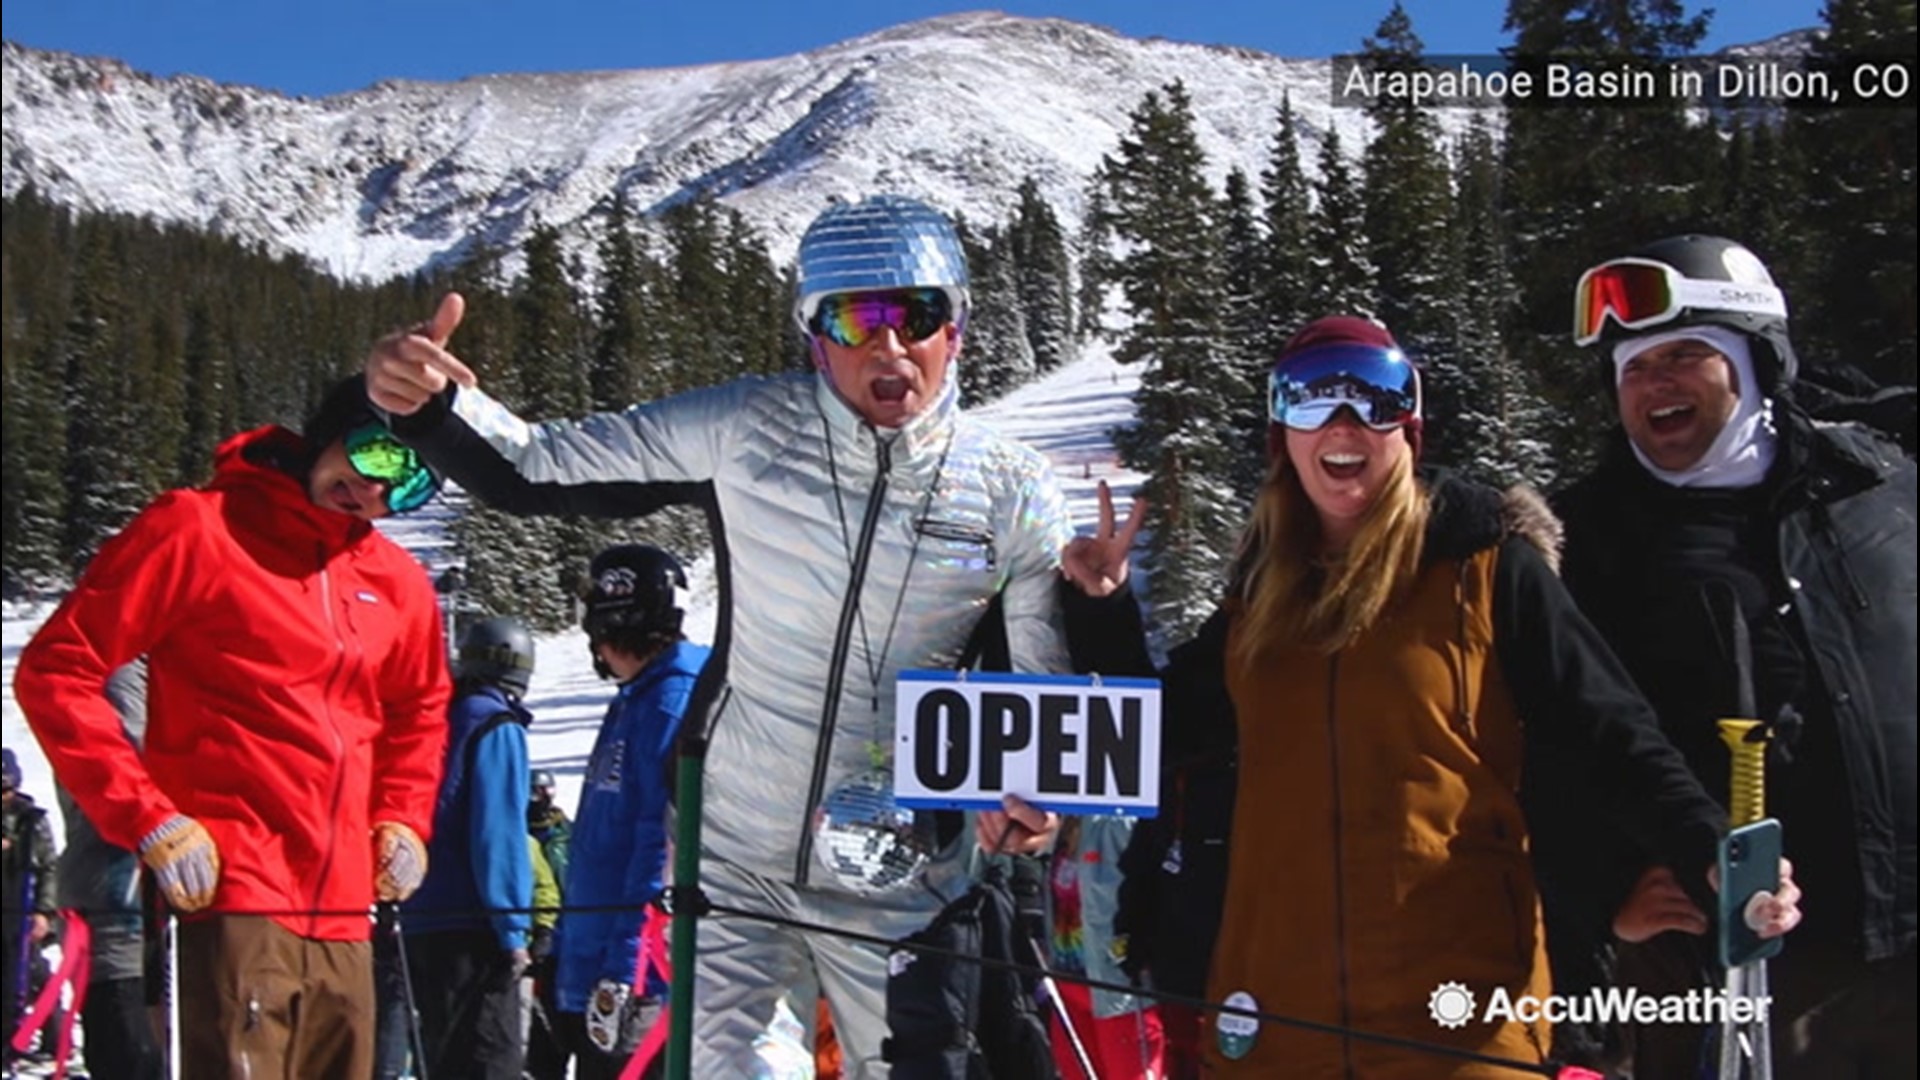 Keystone Resort and Arapahoe Basin turned on their lifts this year for the earliest time in over 10 years. Skiiers and snowboarders are very hopeful and excited to kick off another seaon.